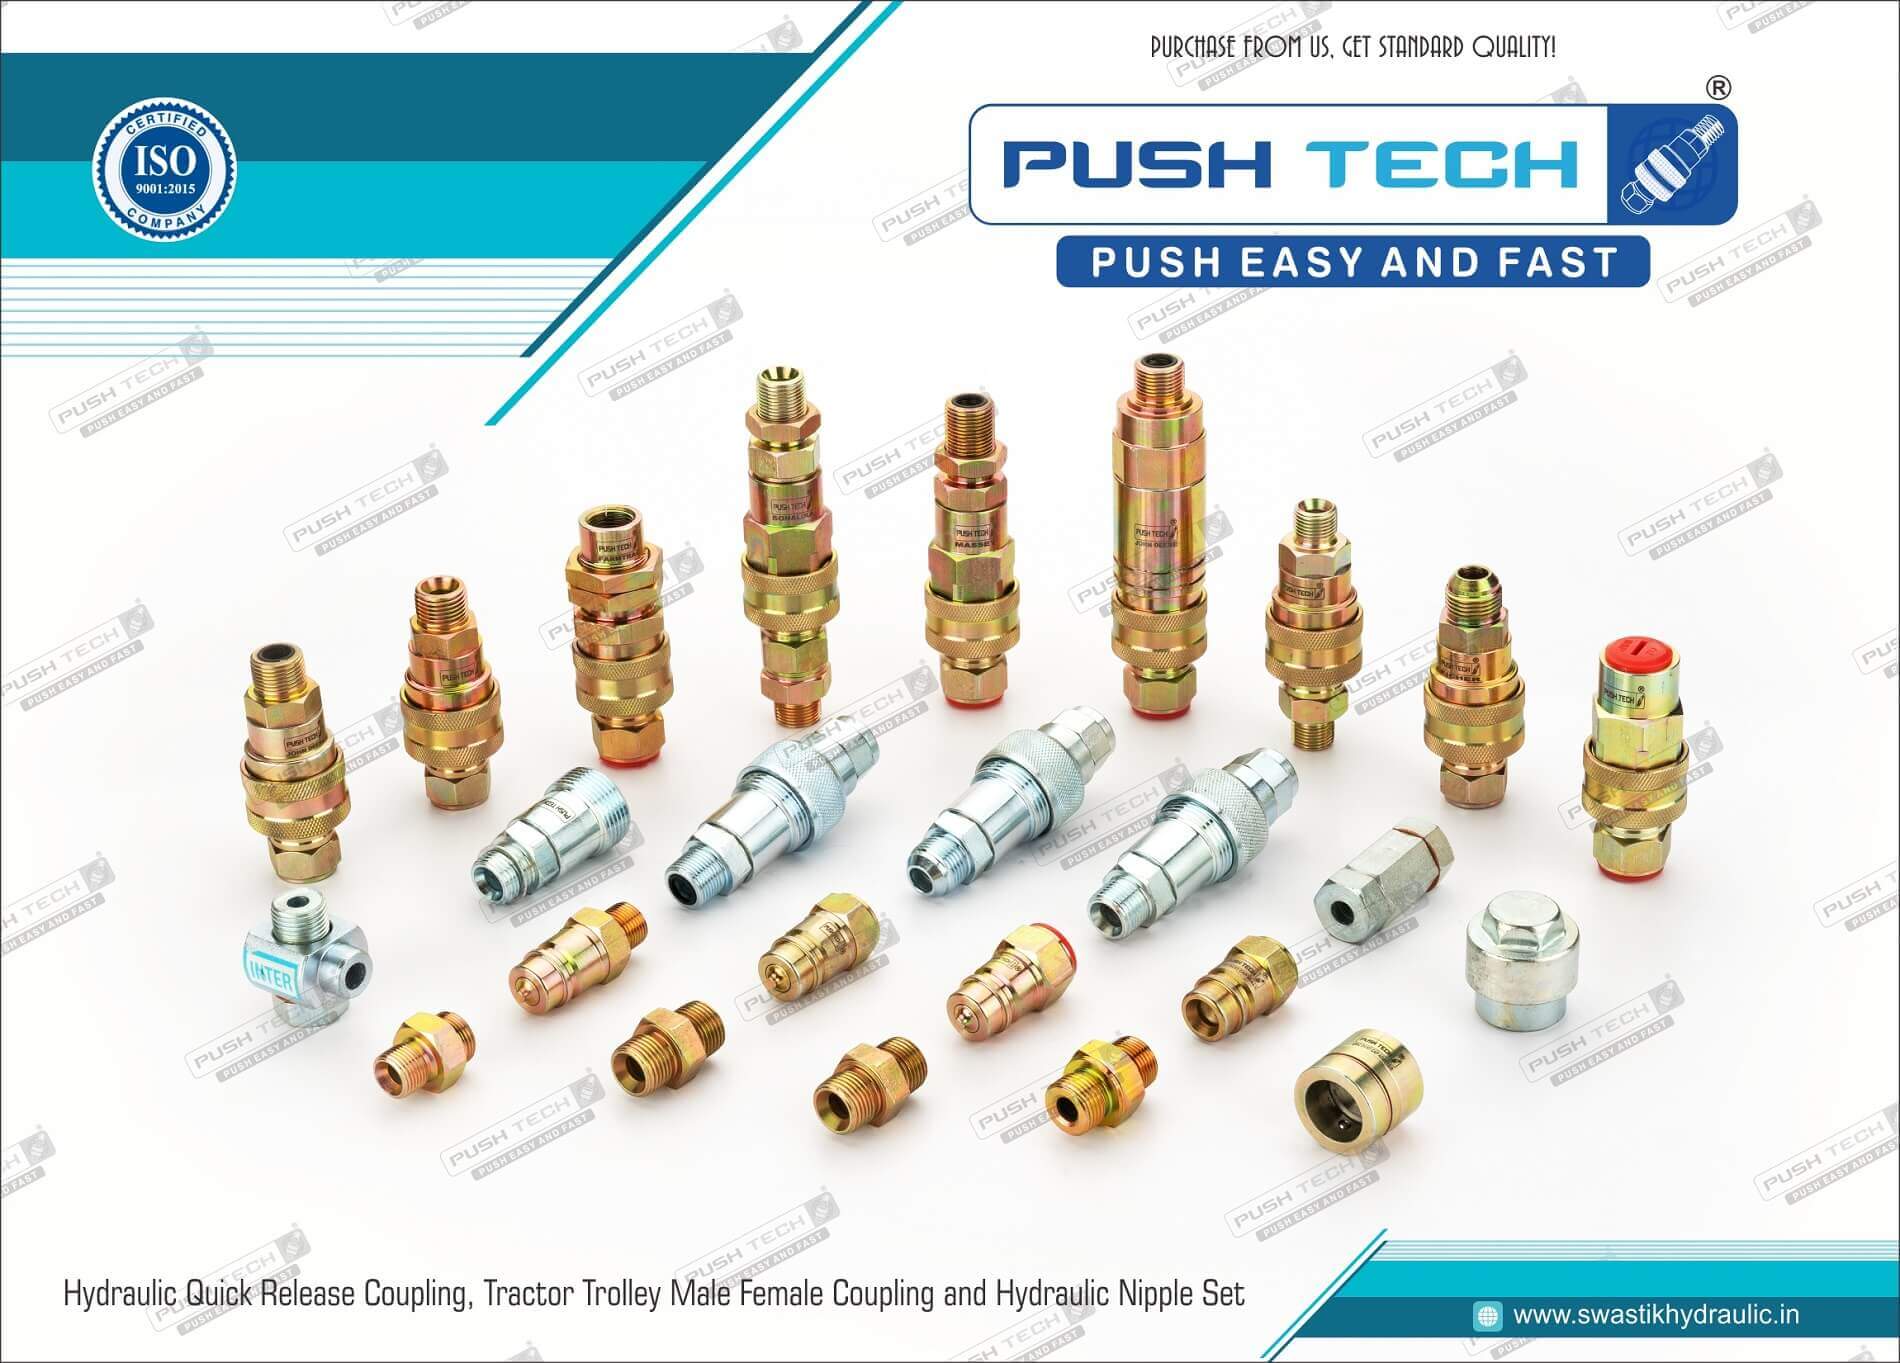 Push Tech - Investment, Insurance and Accounting Solutions